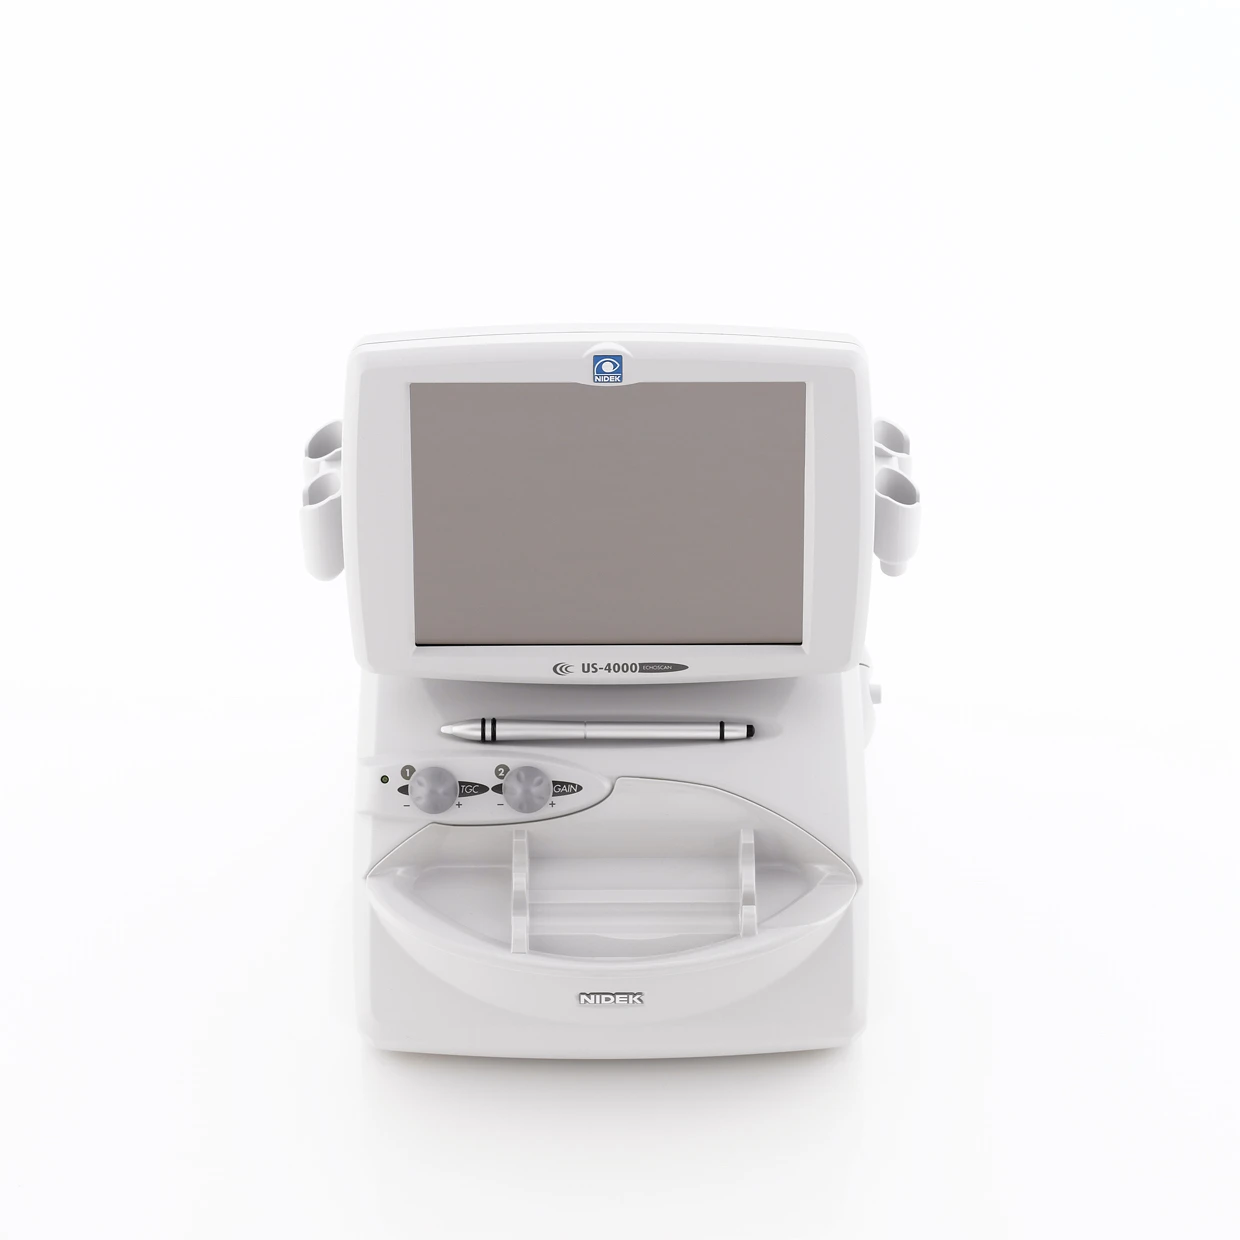 A Nidek Medical Ultrasound Machine With A Screen, Control Buttons, And A Stylus On A White Background. The Device Is Used For Diagnostic Imaging, Typically In A Clinical Setting. The Brand Name &Quot;Nidek&Quot; Is Visible At The Bottom.